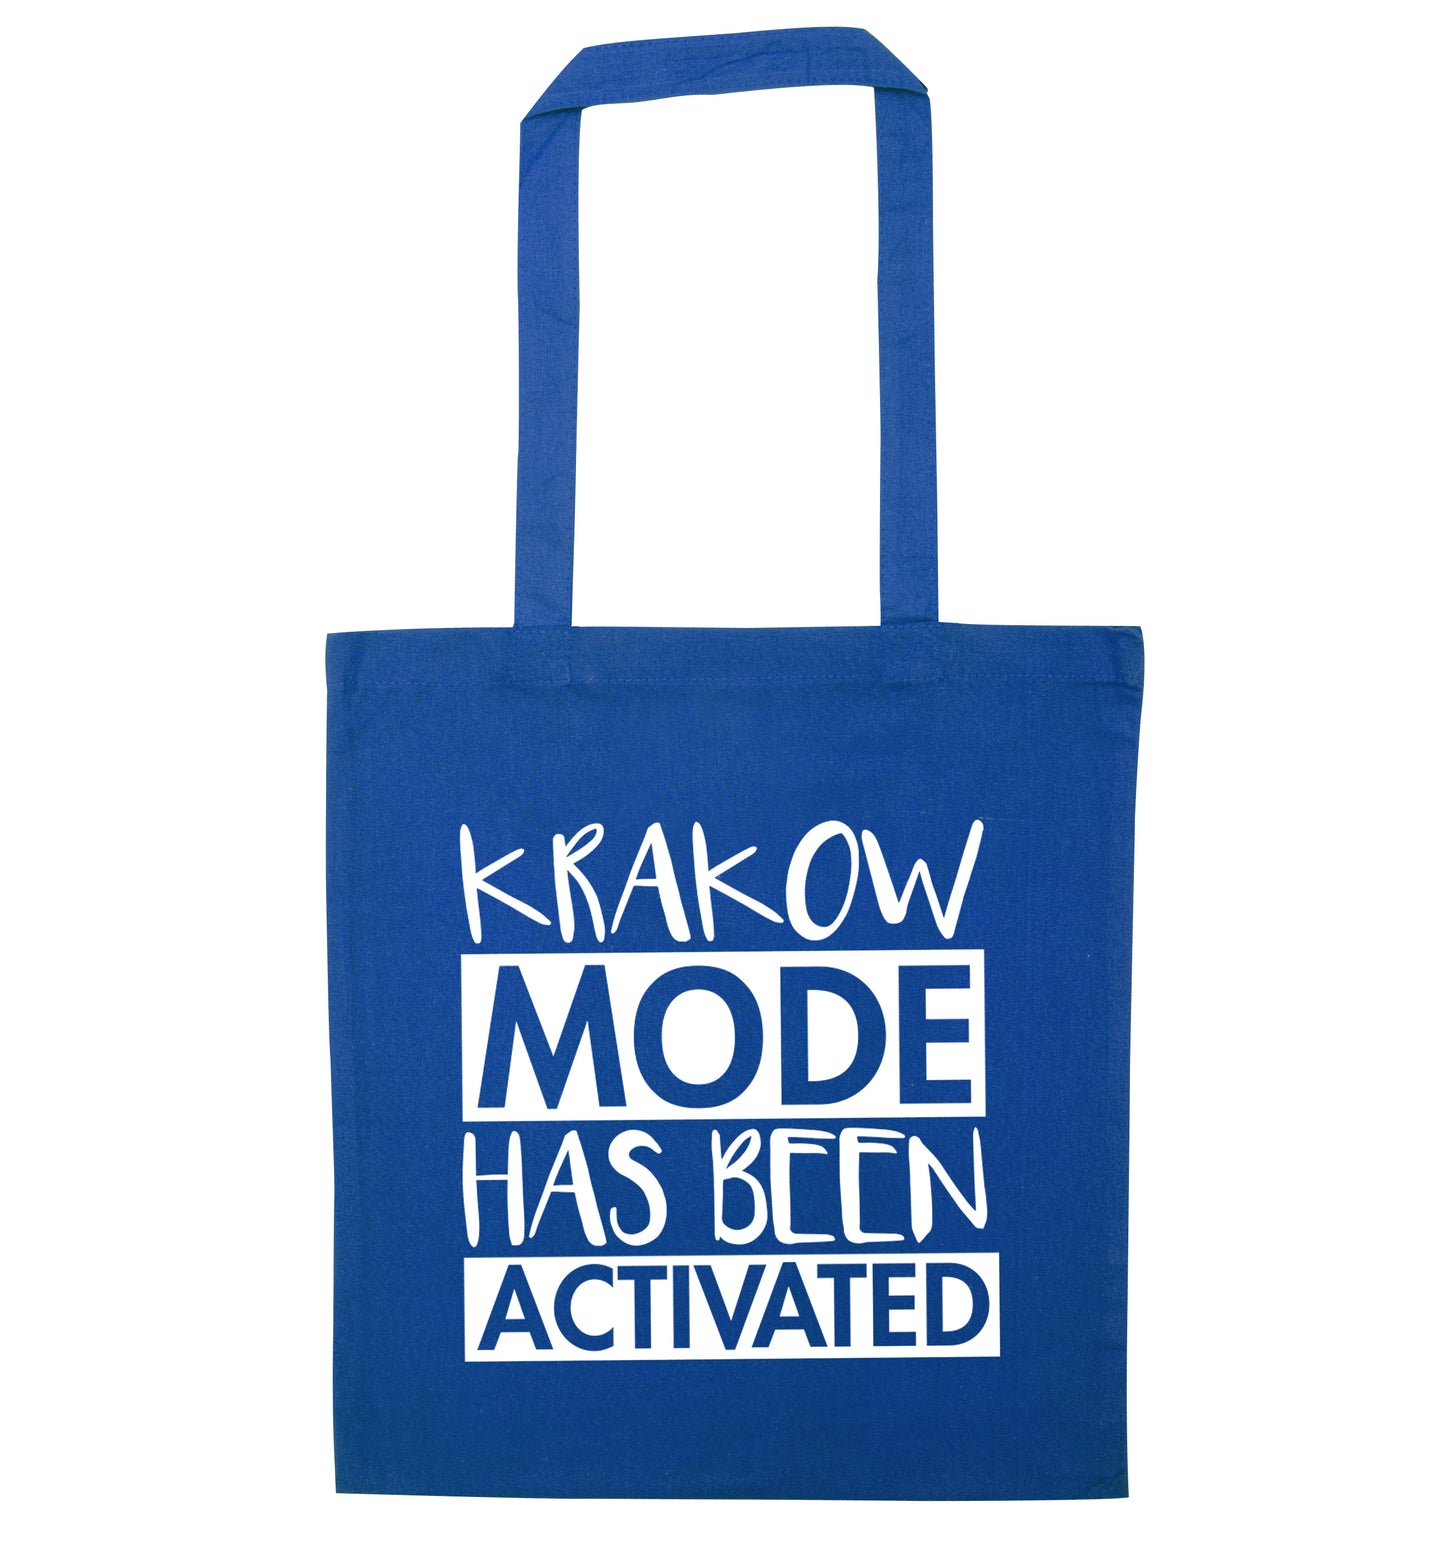 Krakow mode has been activated blue tote bag